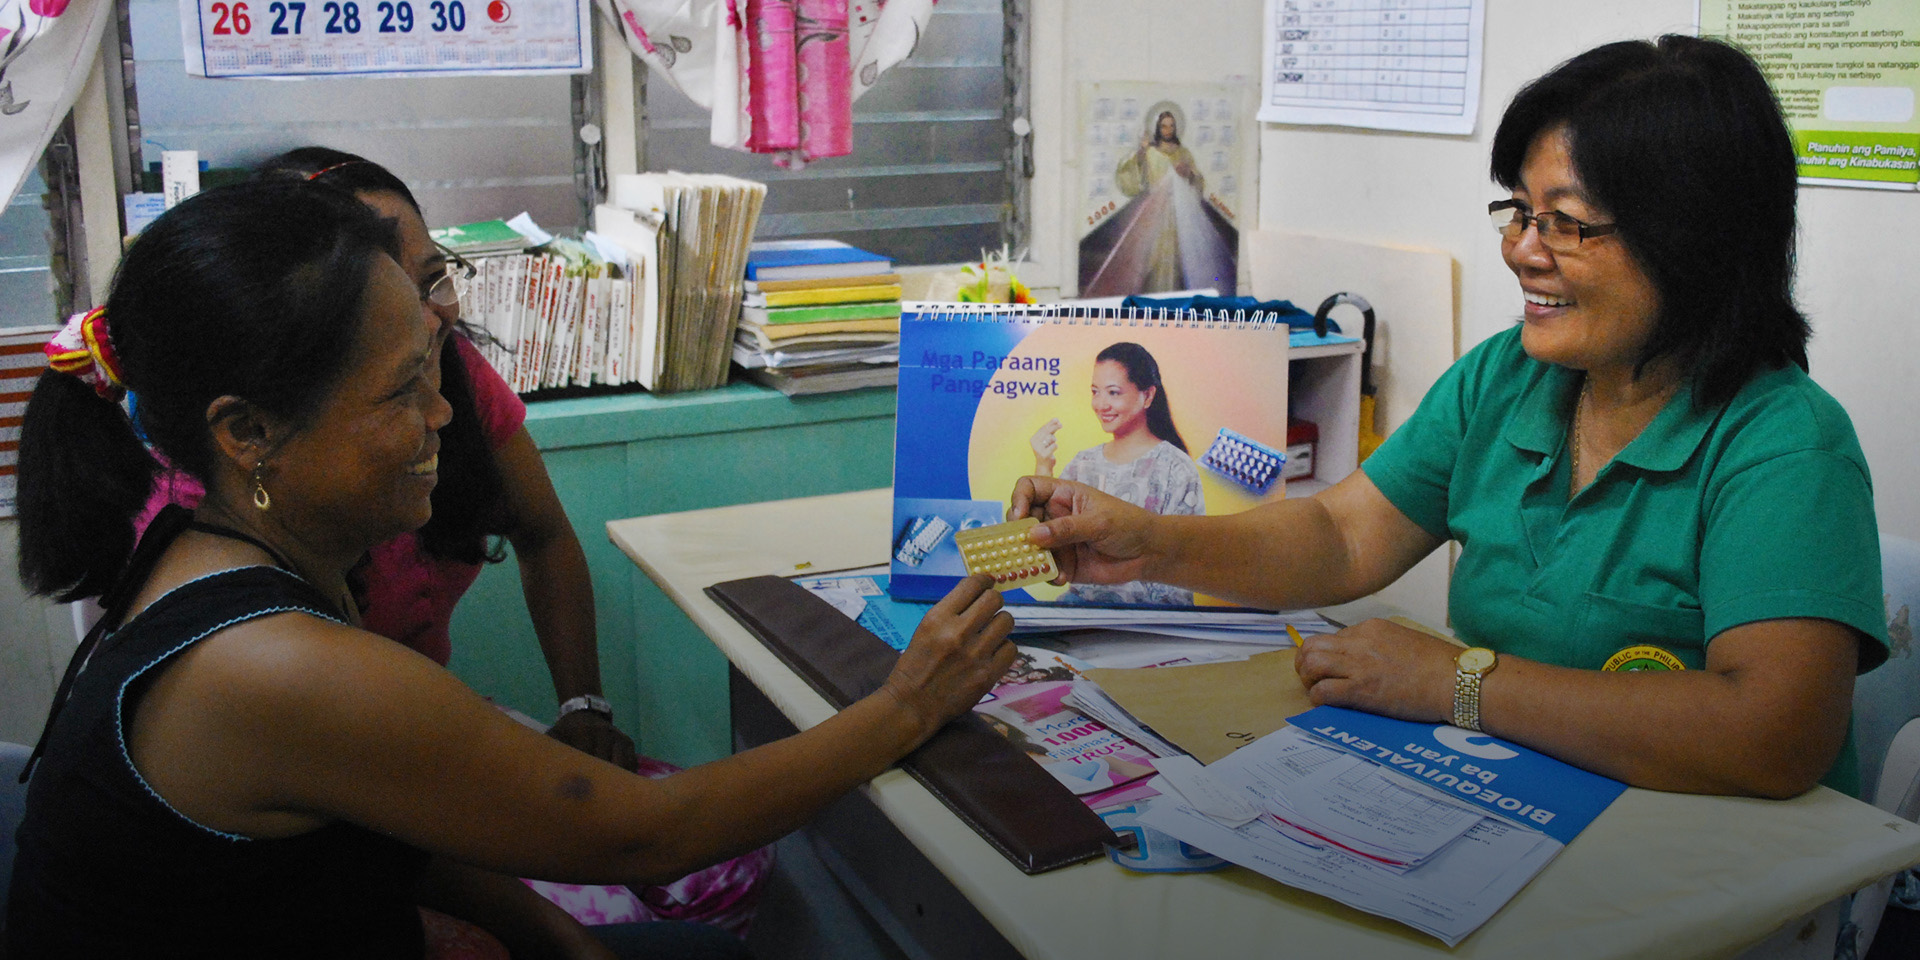 A health worker discusses family planning with a patient.